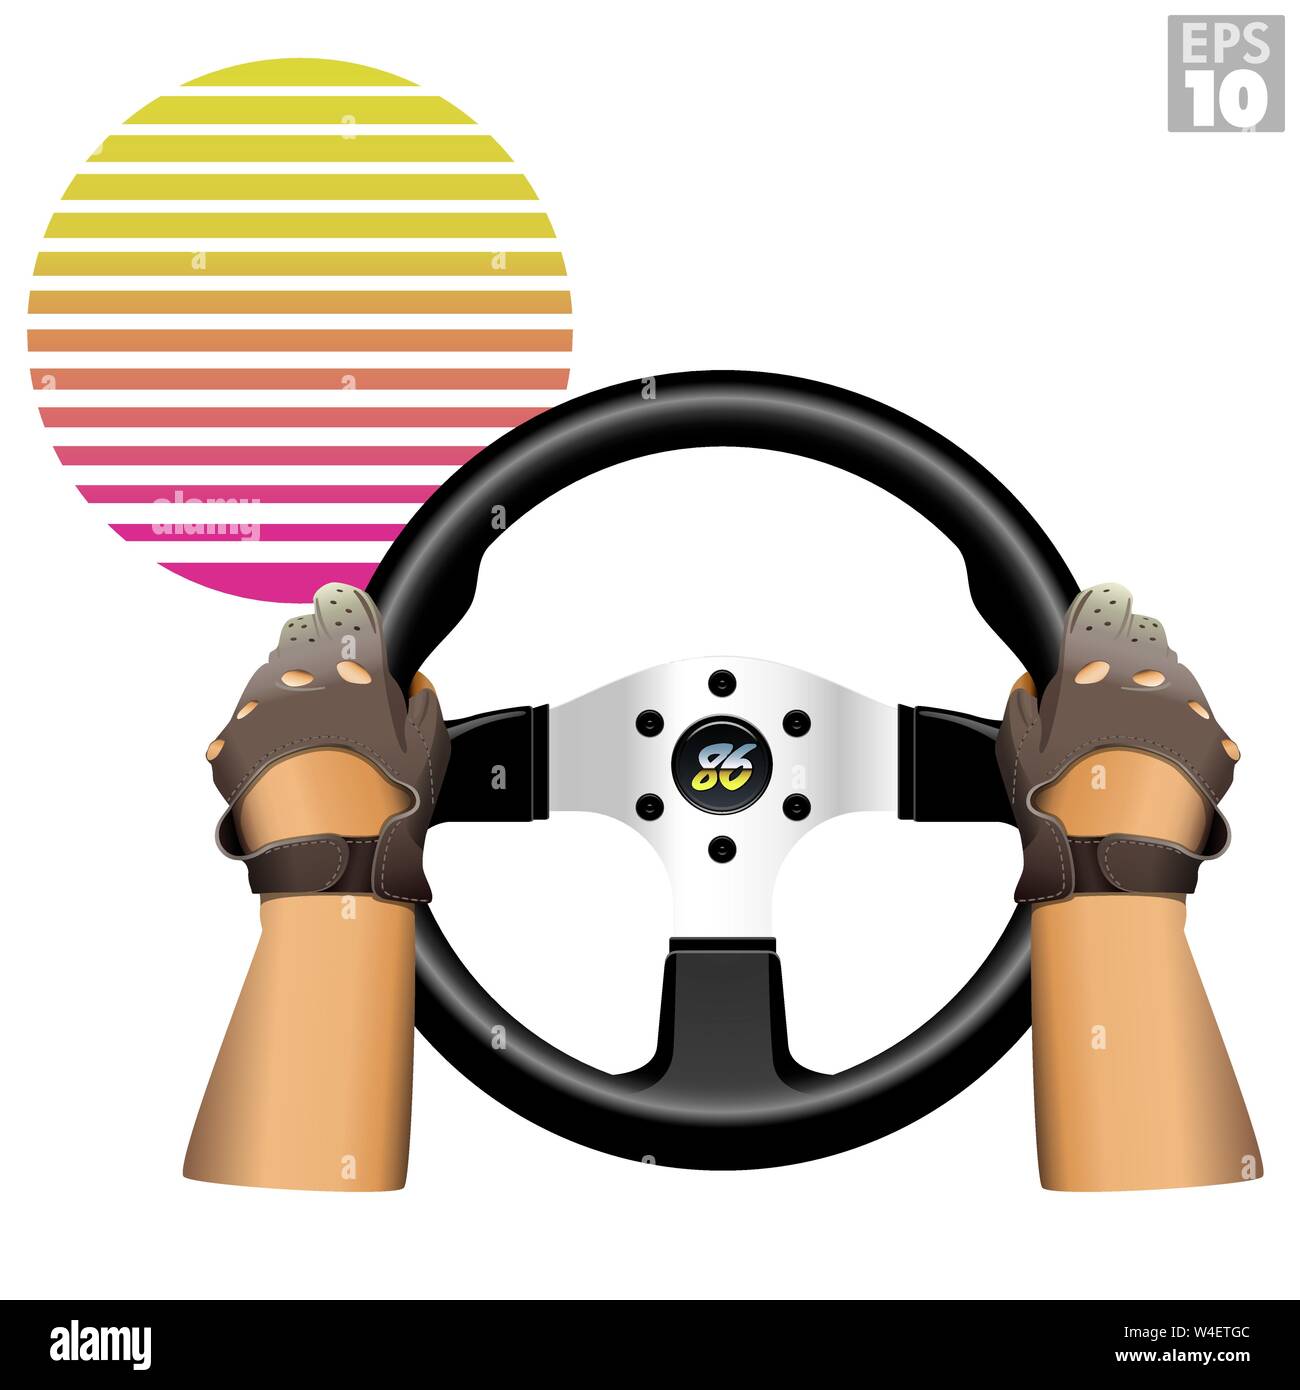 Bad boy driver holding retro steering wheel, wearing 80's style driving leather gloves, sunset in the background in the style of 1986 video games. Stock Vector